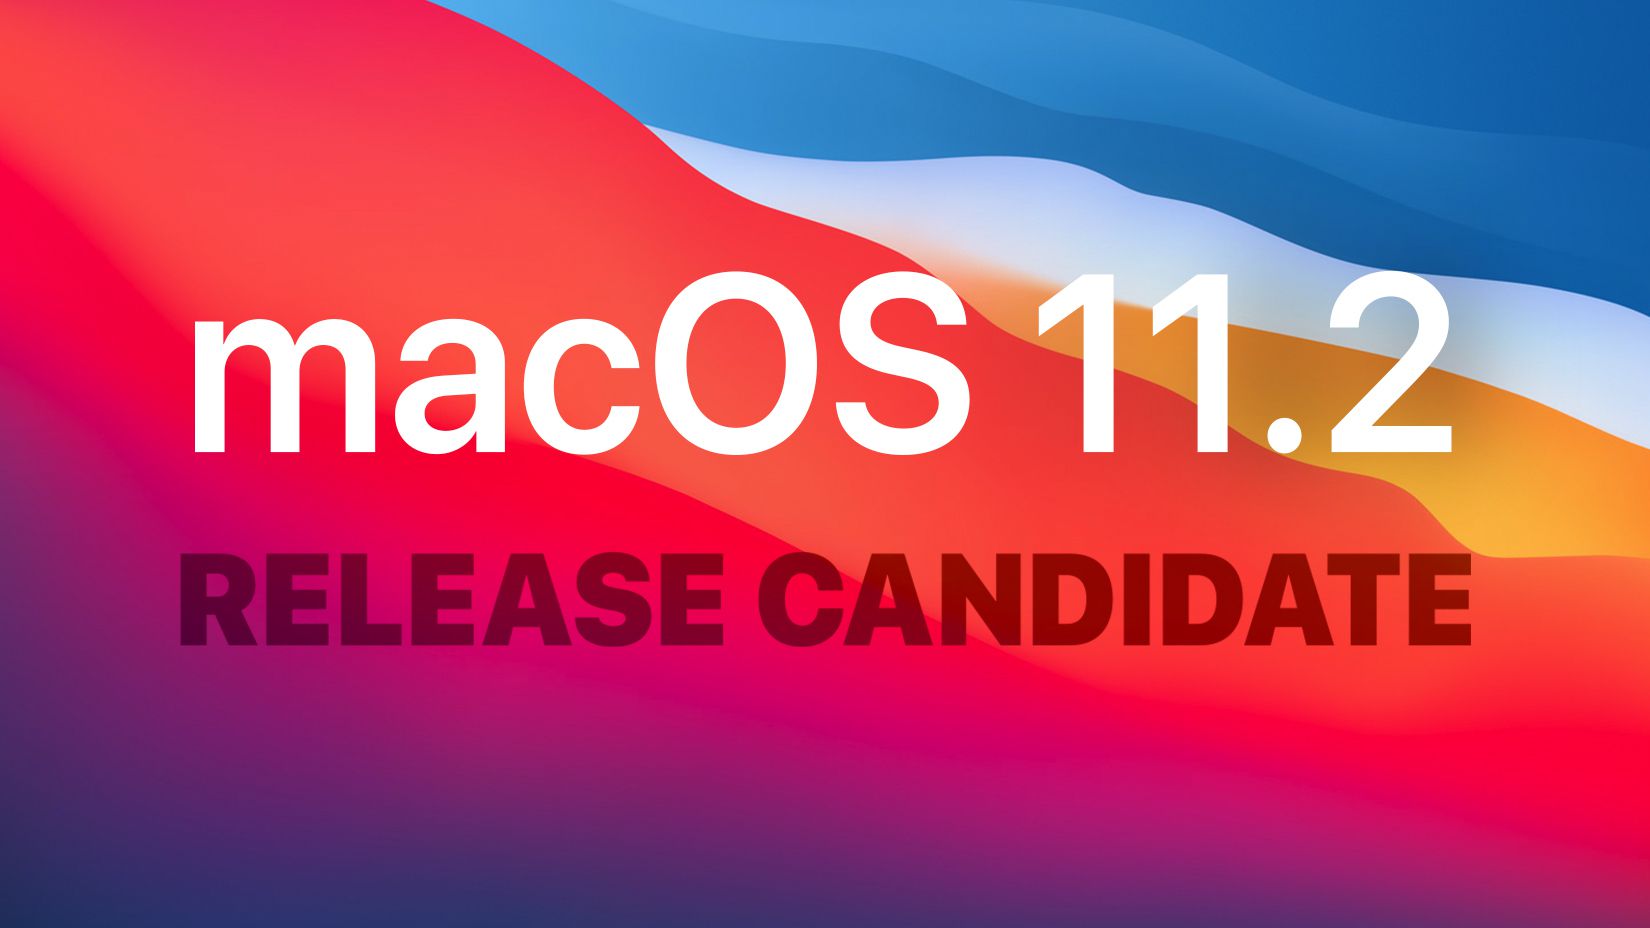 Apple Seeds candidate for the release of macOS Big Sur 11.2 for developers and public beta testers